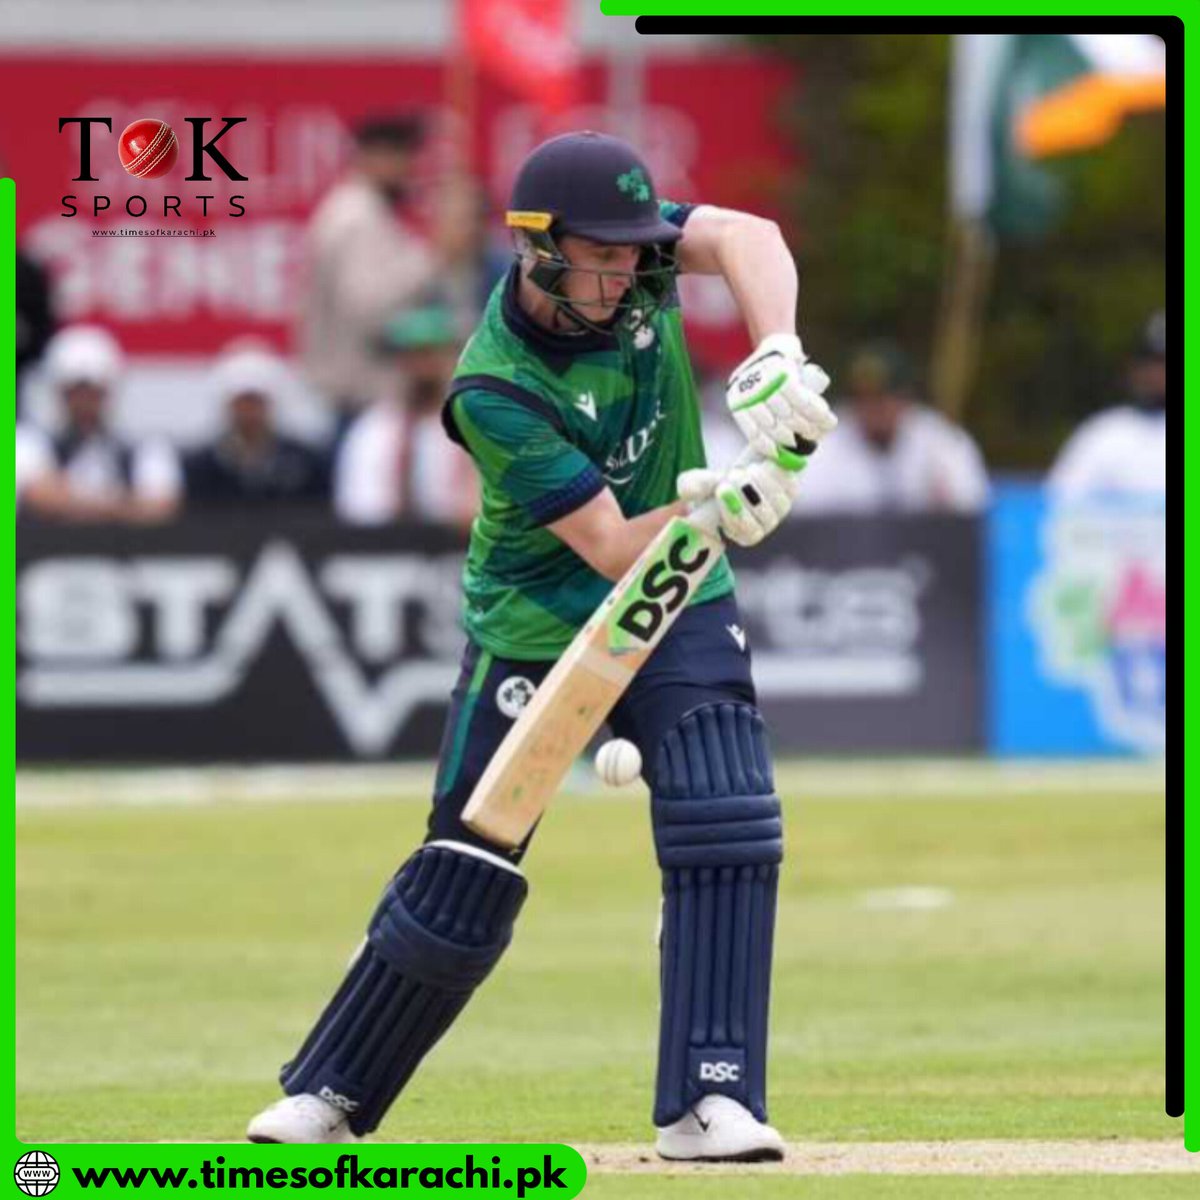 Lorcan Tucker reached his fifty in just 29 balls as Ireland scored 95/1 after 10 overs.

#TOKSports #LorcanTucker #PakvIre